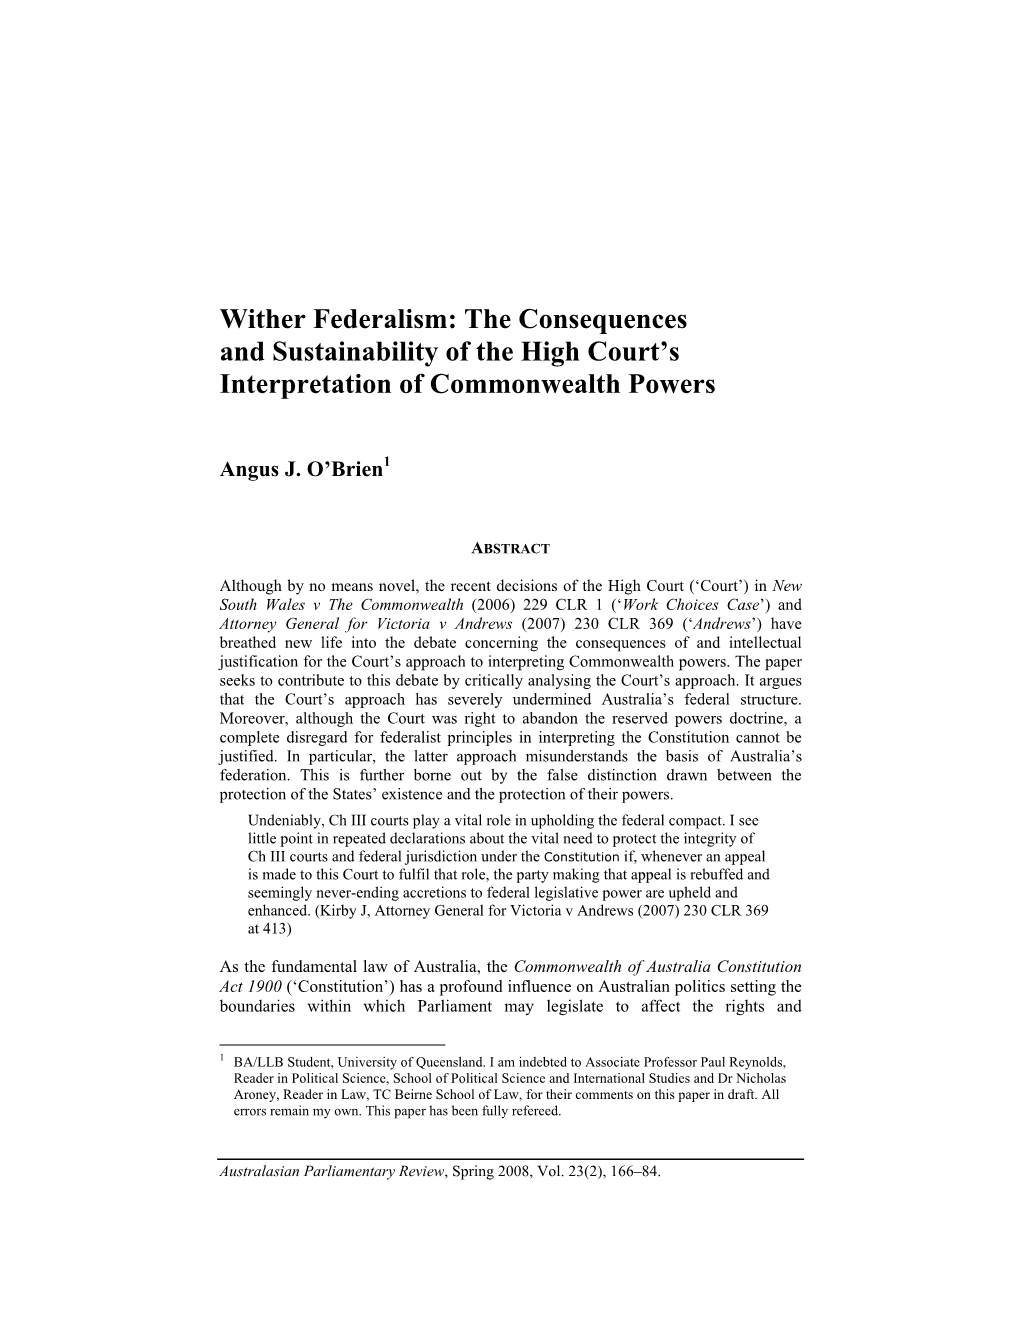 Wither Federalism: the Consequences and Sustainability of the High Court’S Interpretation of Commonwealth Powers